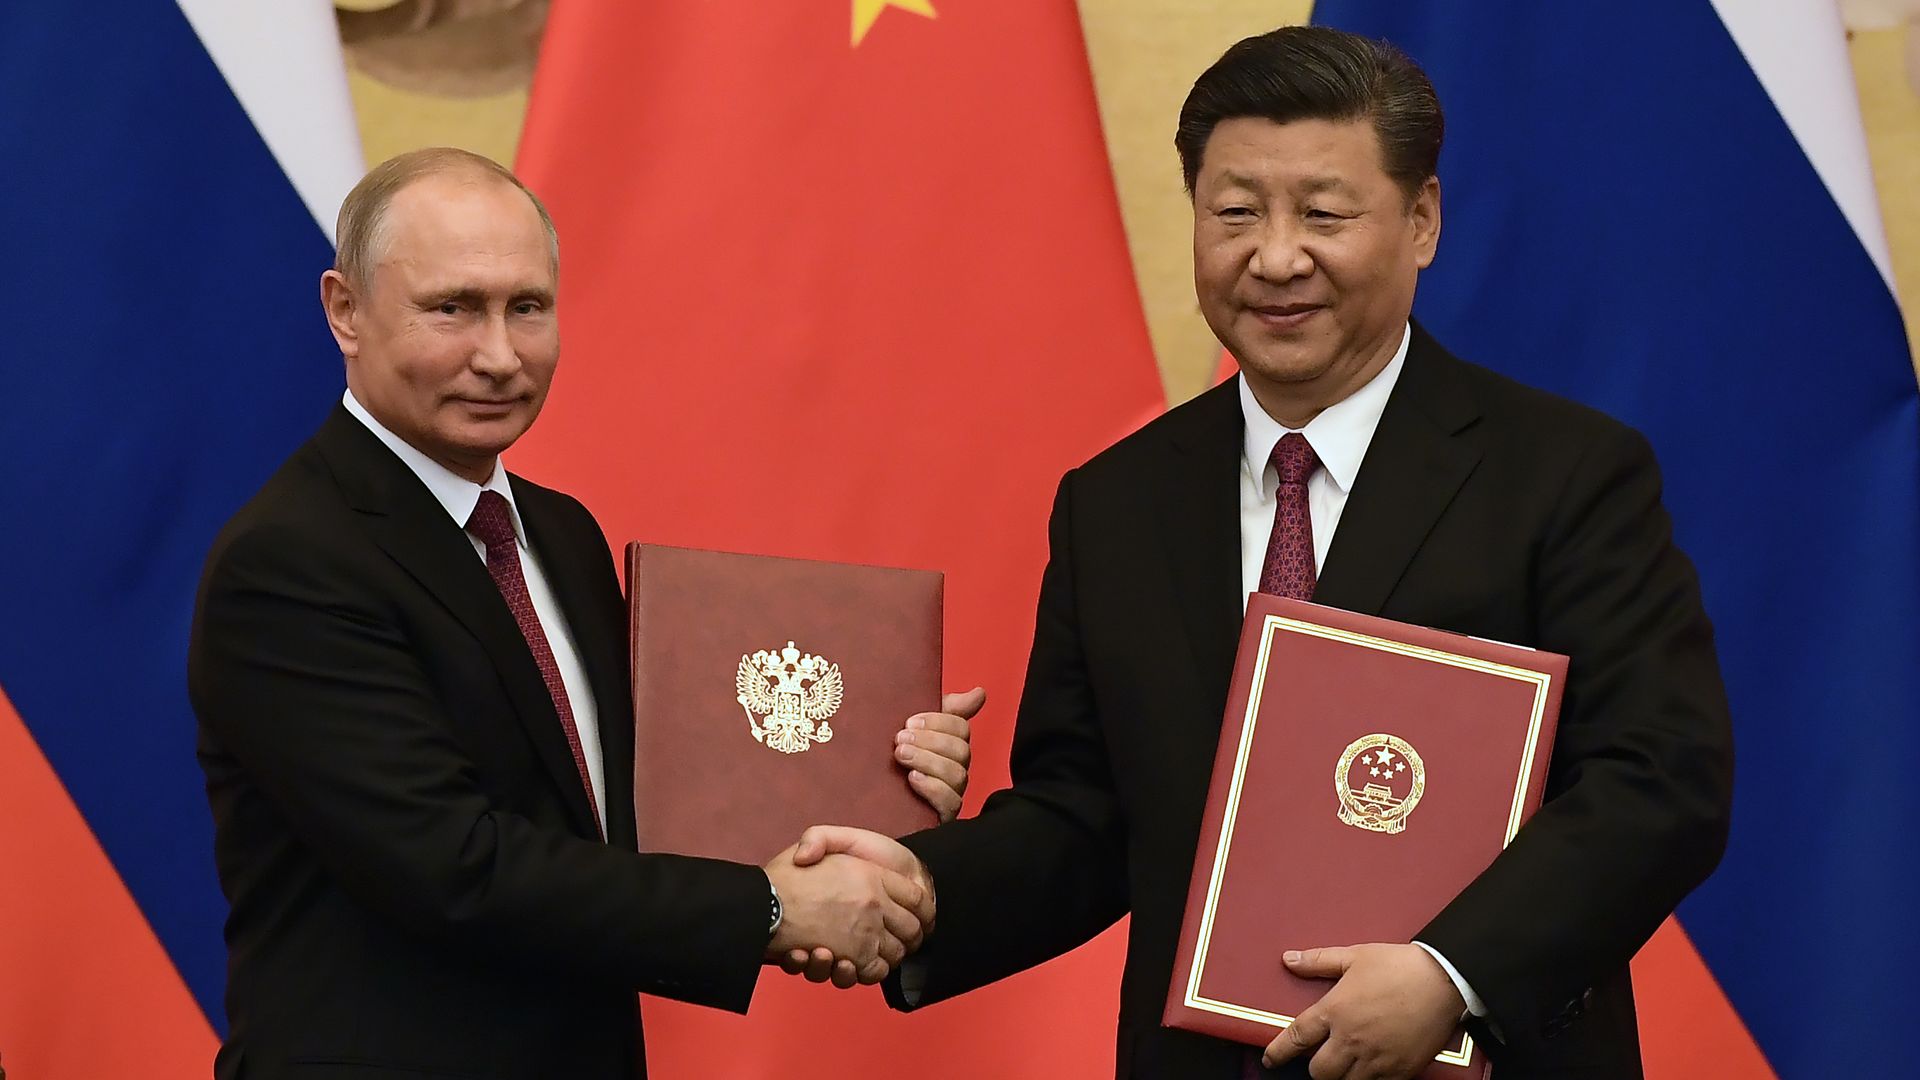  Chinese President Jinping congratulates Russian President Putin after presenting him with the Friendship Medal